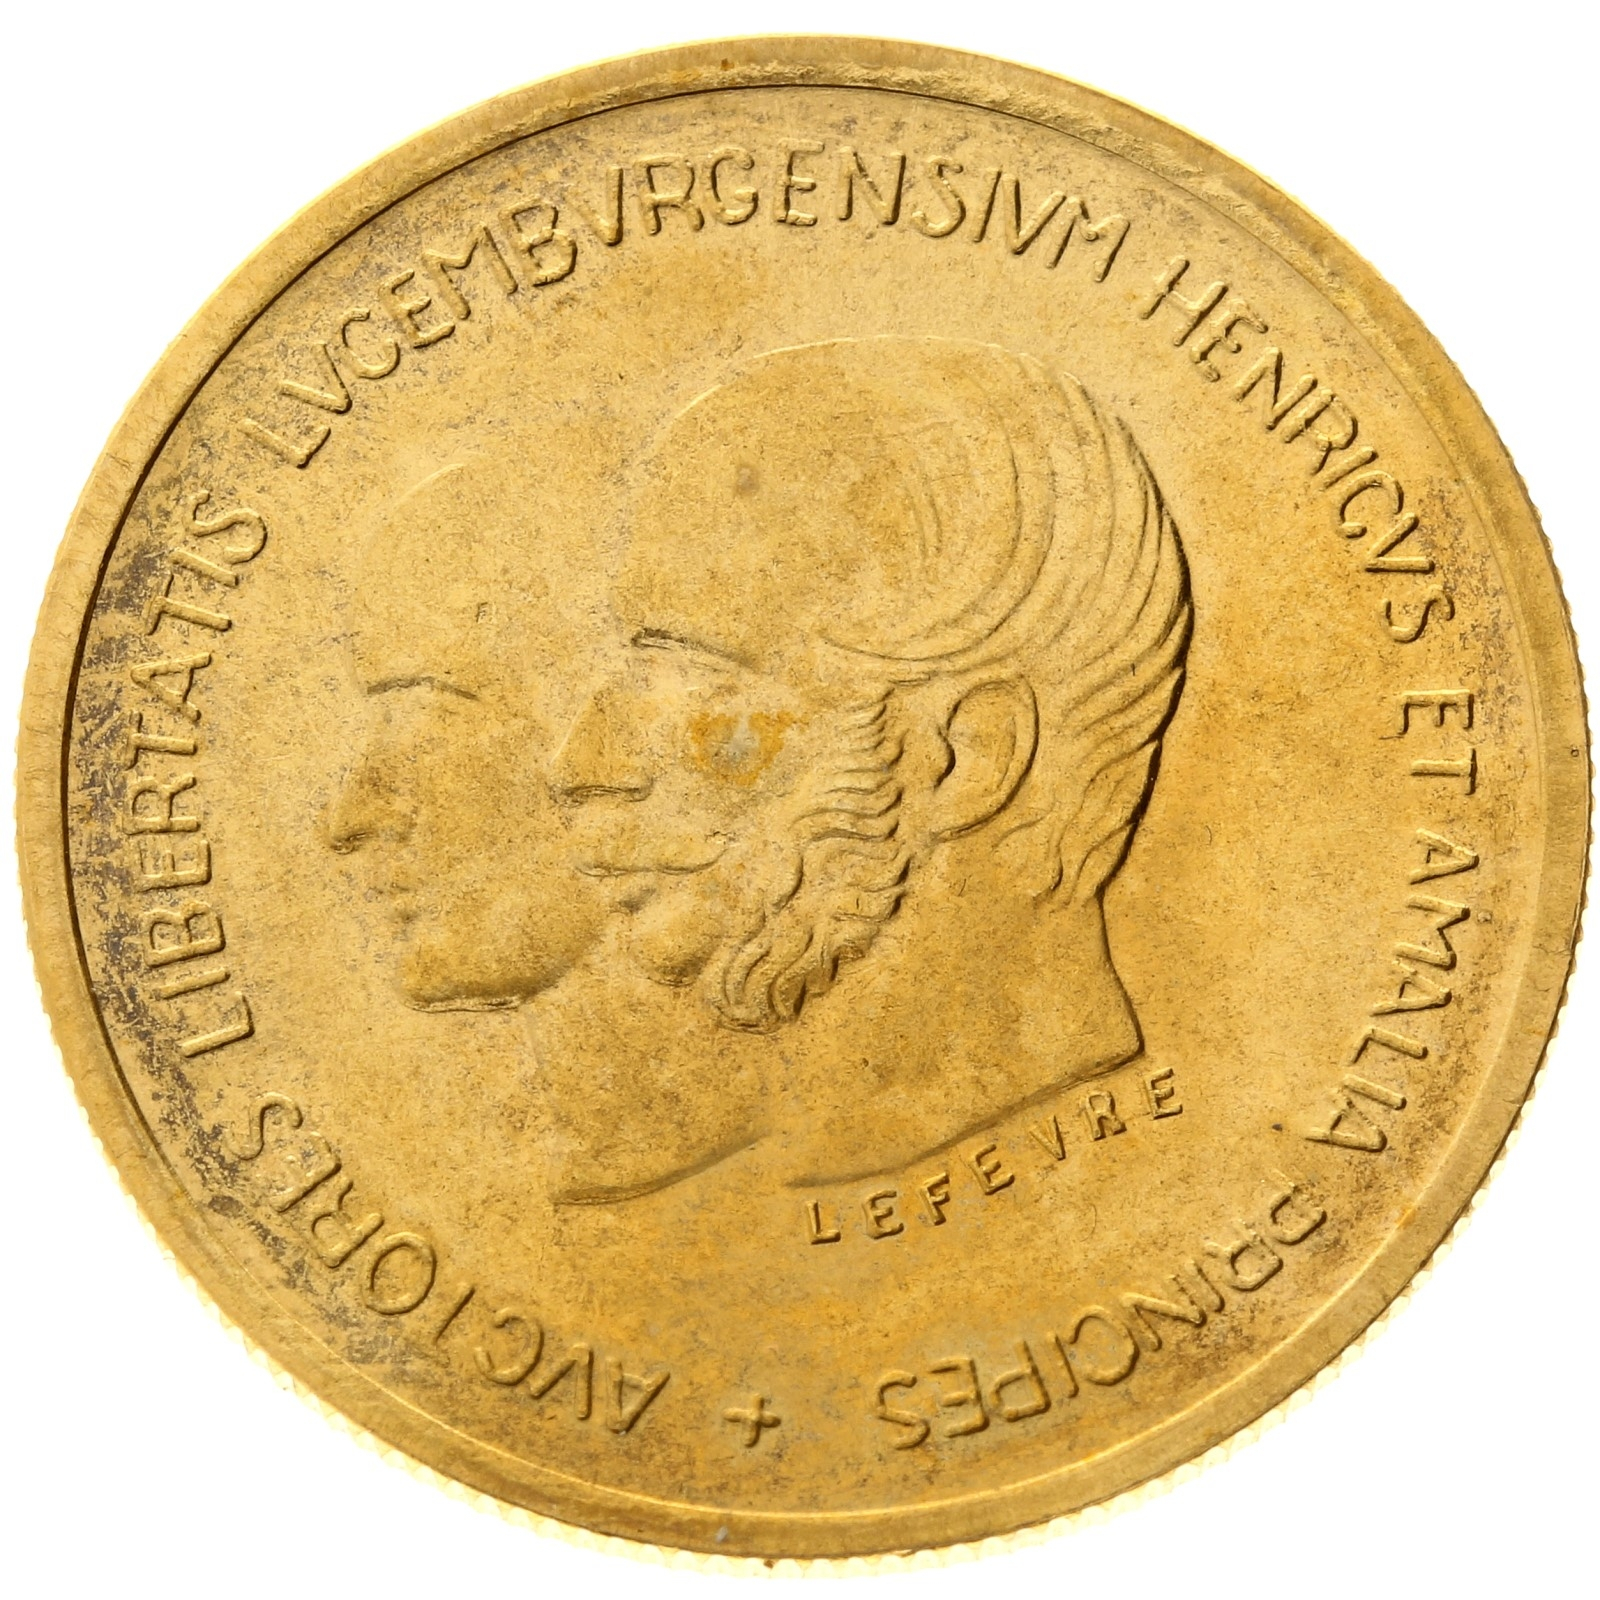 Luxembourg - 40 Francs 1967 - 100th anniversary of London contract